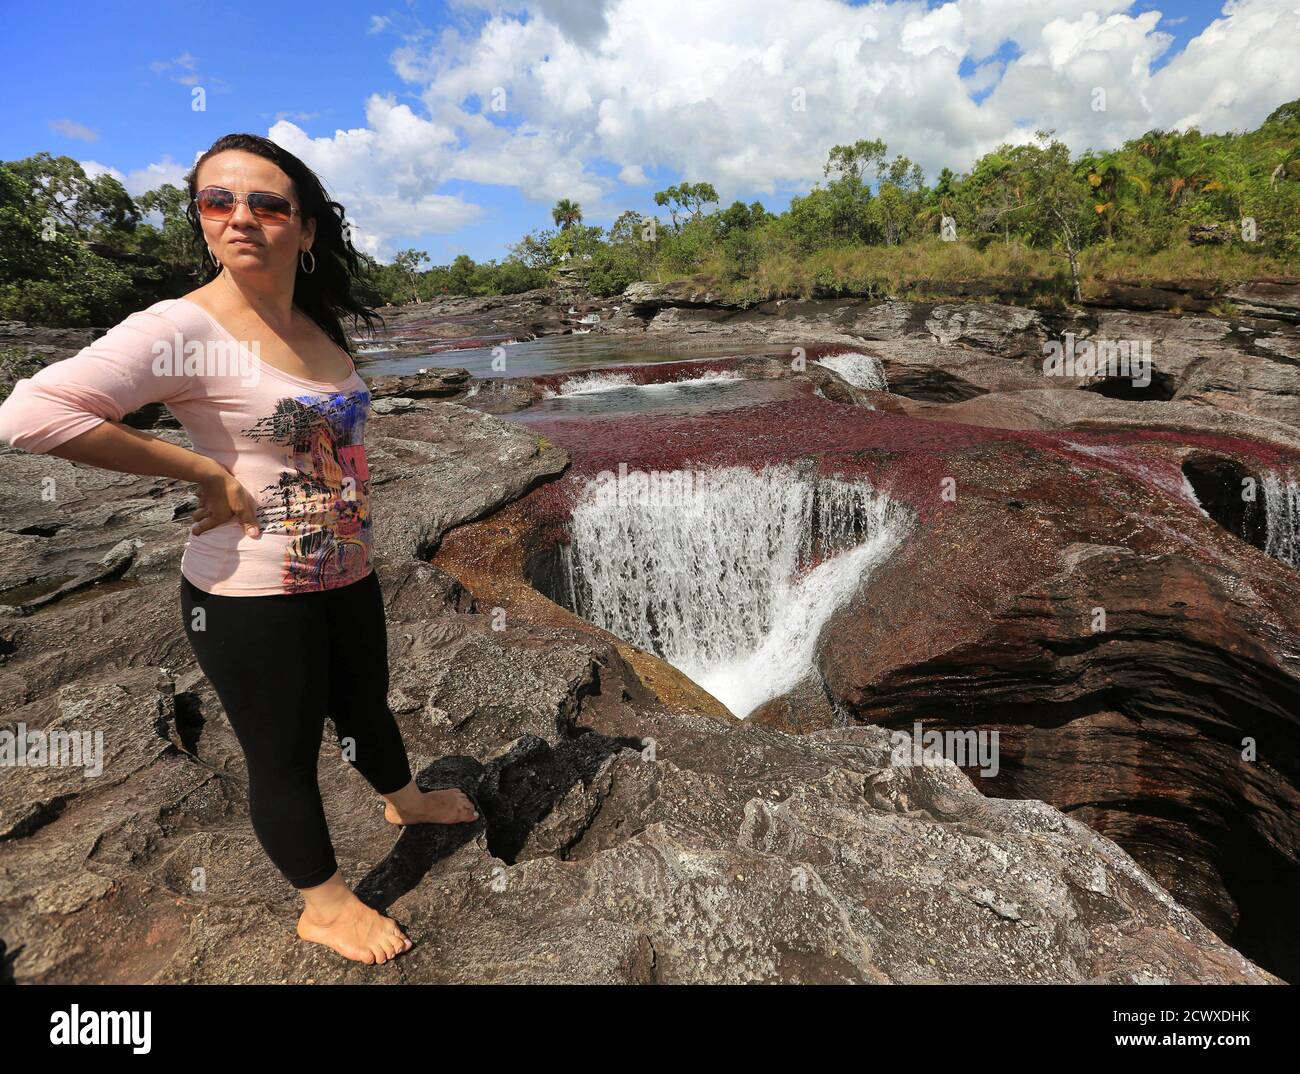 An eco-tourist stands close to a stone hole in Cano Cristales in the Sierra  de La Macarena National Park in Meta province November 24, 2013. The park  is located in the south-east